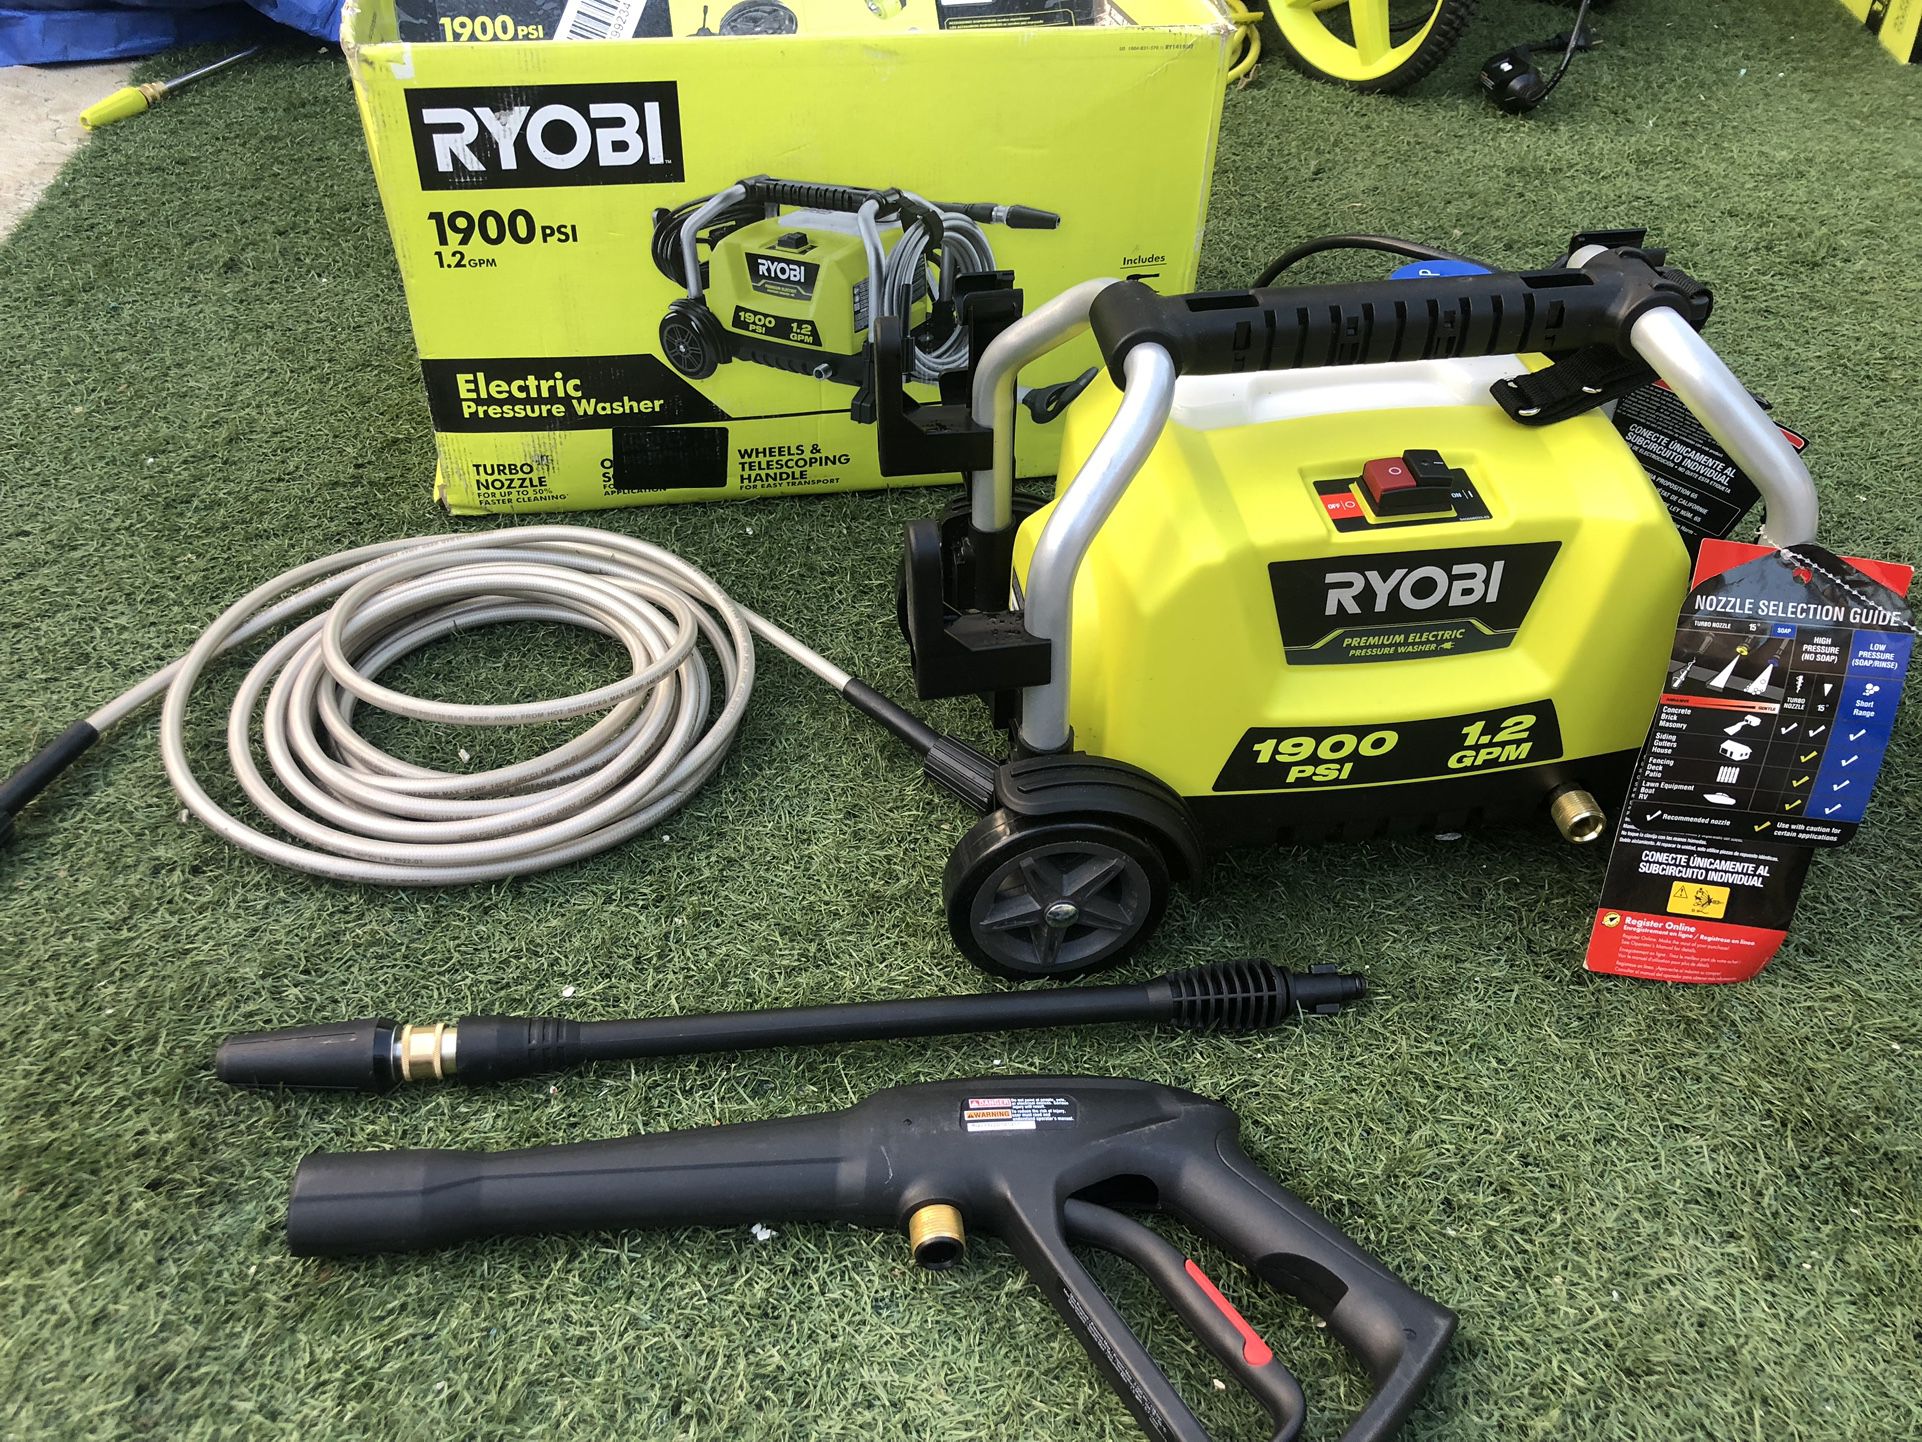 RYOBI 1900 PSI 1.2 GPM Cold Water Wheeled Corded Electric Pressure Washer $90